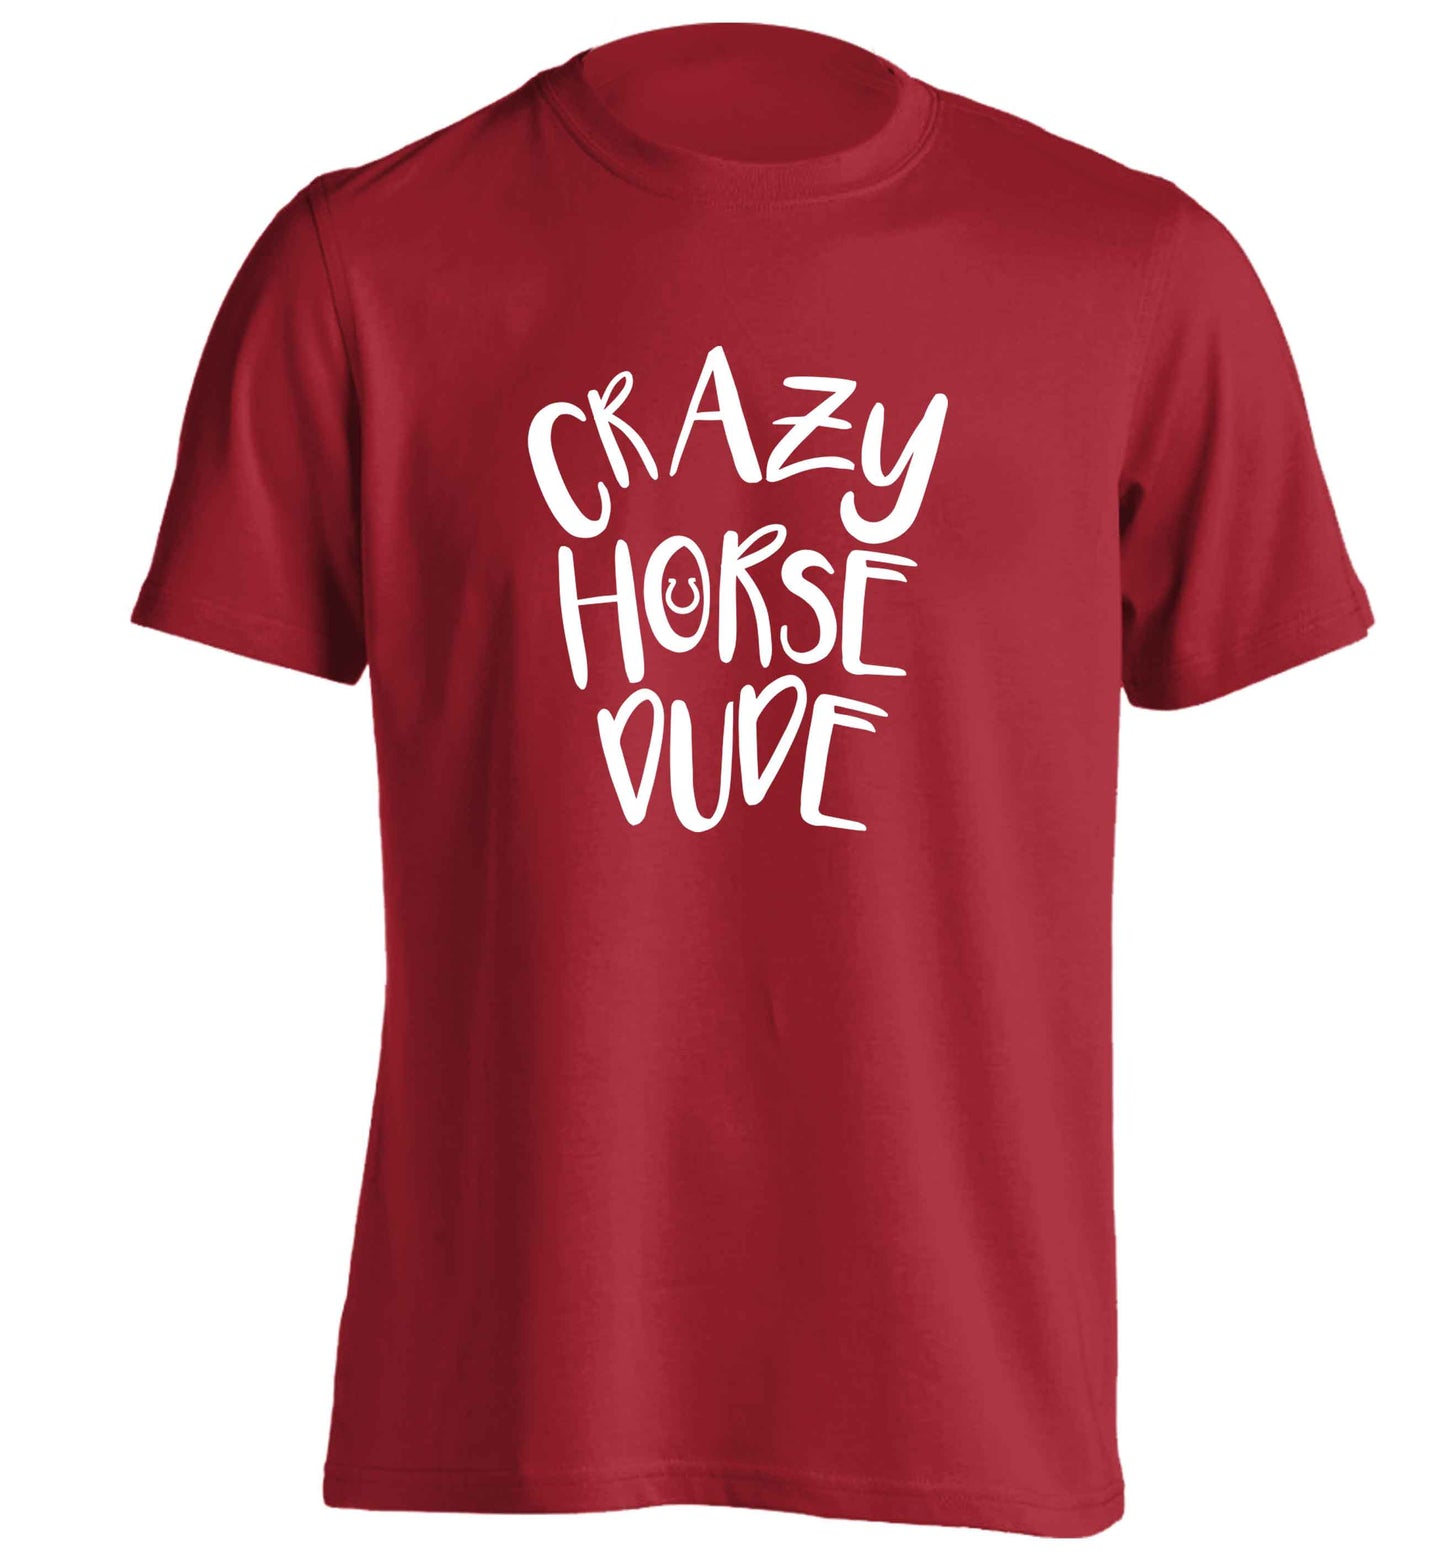 Crazy horse dude adults unisex red Tshirt 2XL